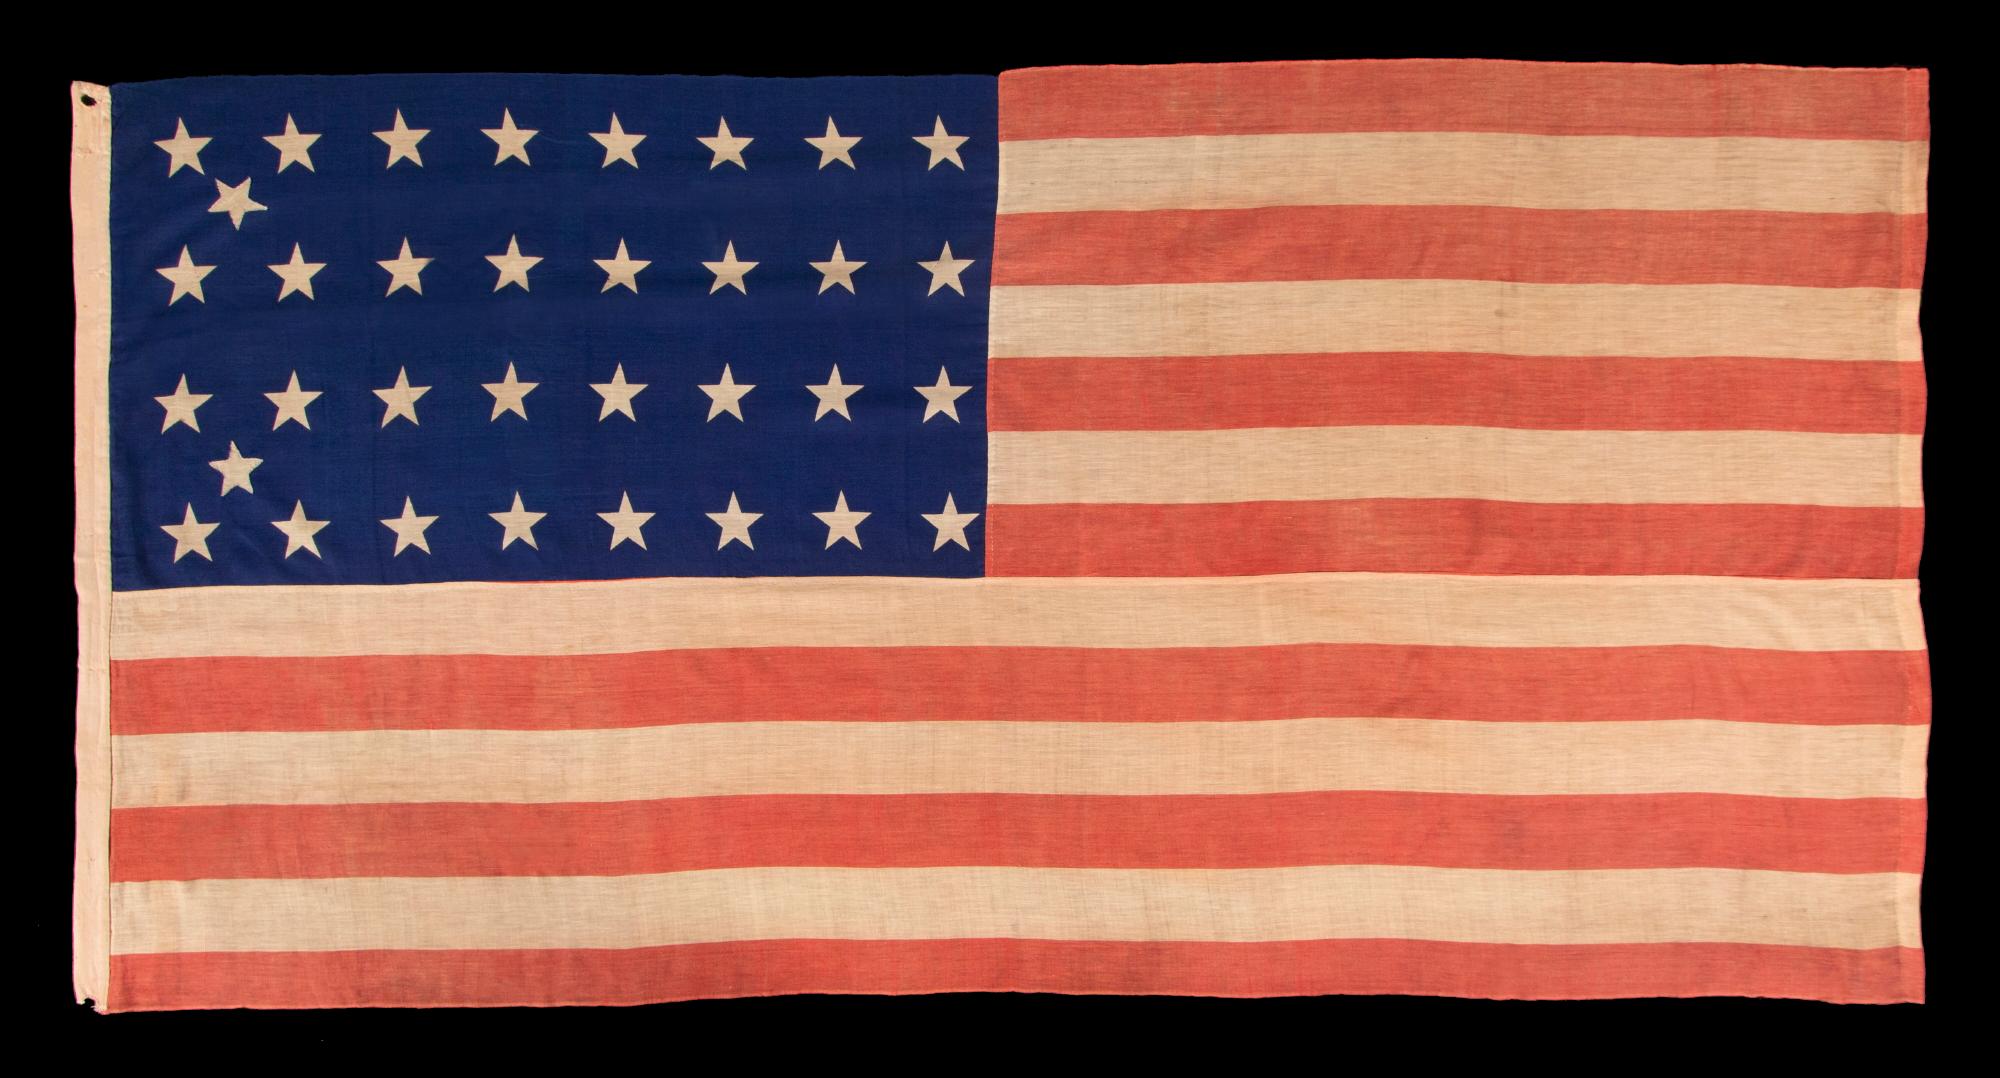 34 STAR ANTIQUE AMERICAN FLAG OF THE CIVIL WAR PERIOD (1861-63), WITH WOVEN STRIPES, PRESS-DYED STARS, AND BEAUTIFUL COLORS, POSSIBLY MADE IN NEW YORK BY THE ANNIN COMPANY, REFLECTS THE ADDITION OF KANSAS TO THE UNION, 1861-1863

34 star flag of the